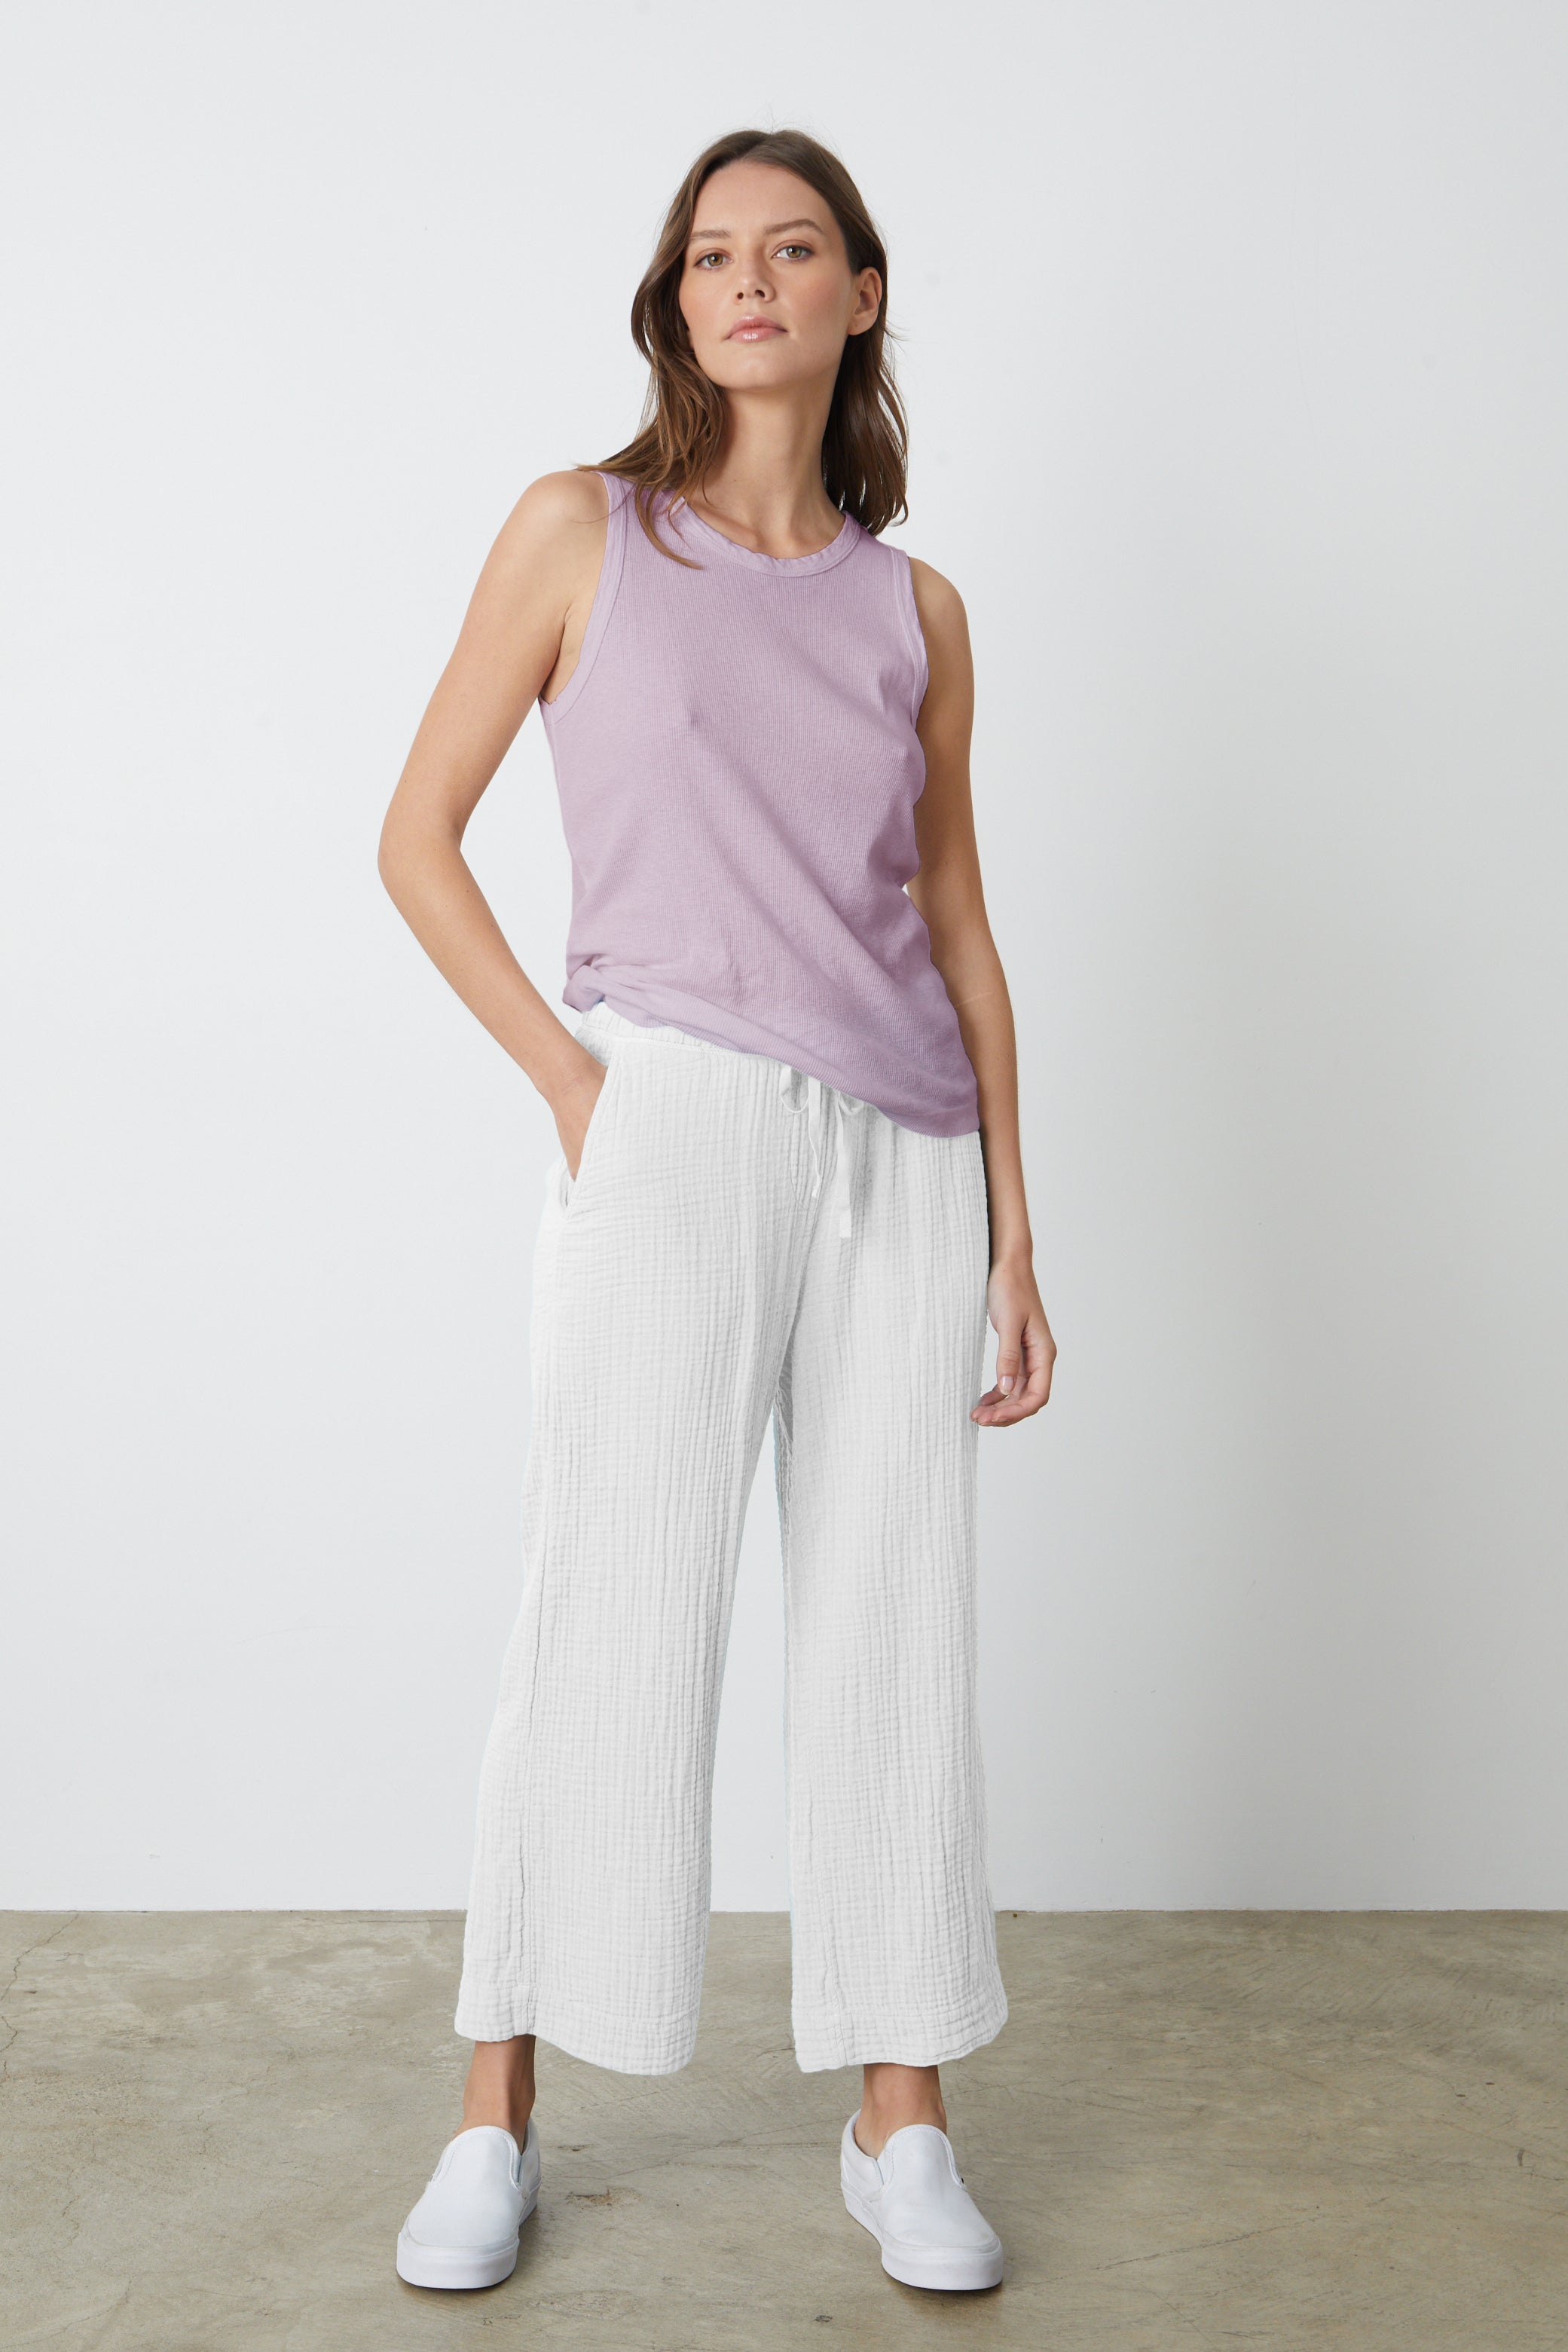   The model is wearing a white Velvet by Graham & Spencer FRANNY COTTON GAUZE PANT and lilac tank top. 